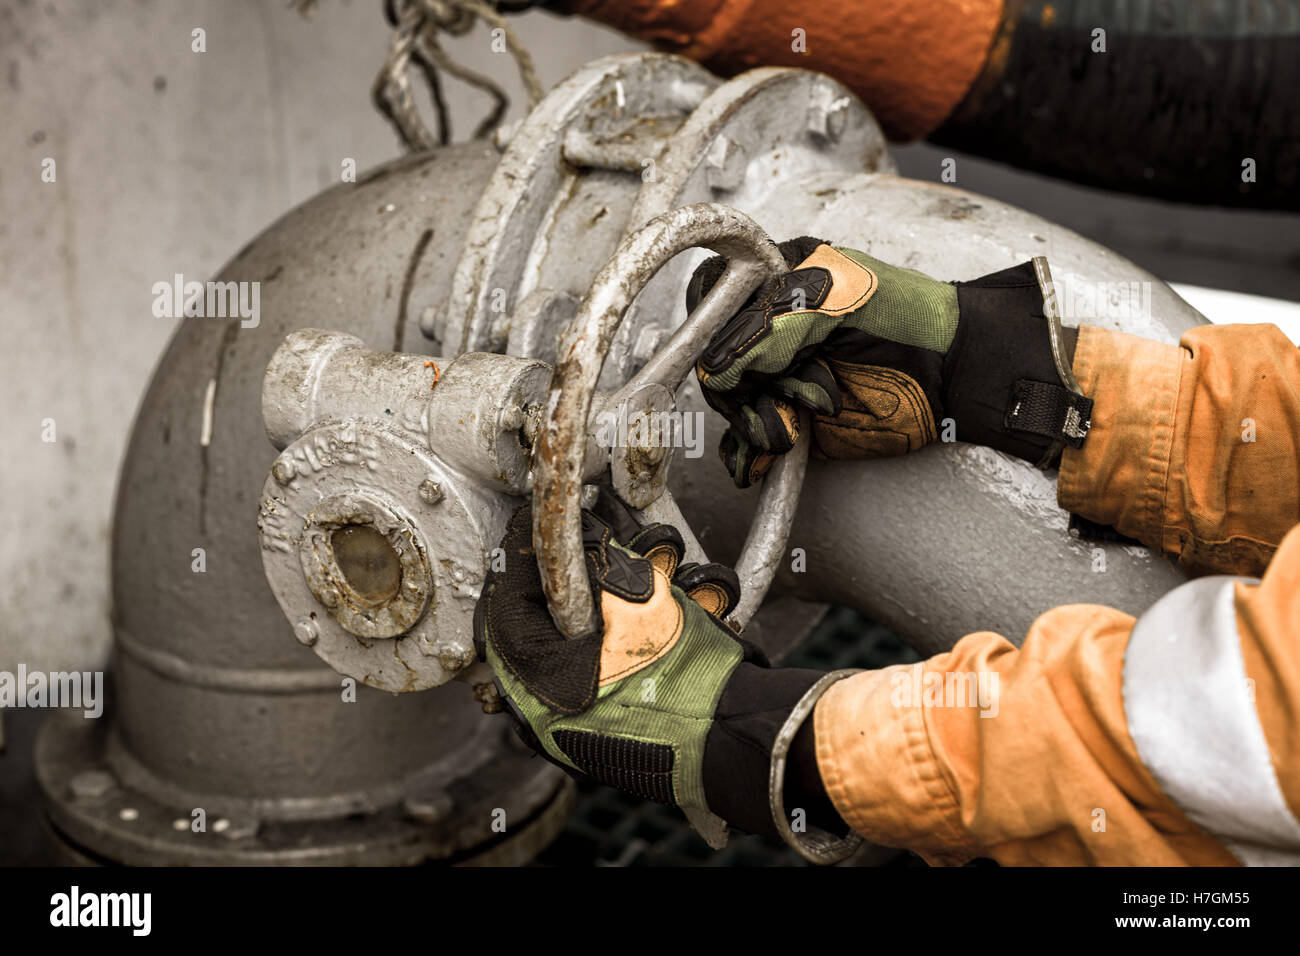 Man in safety gloves and orange coverall is opening/closing pipe valve Stock Photo